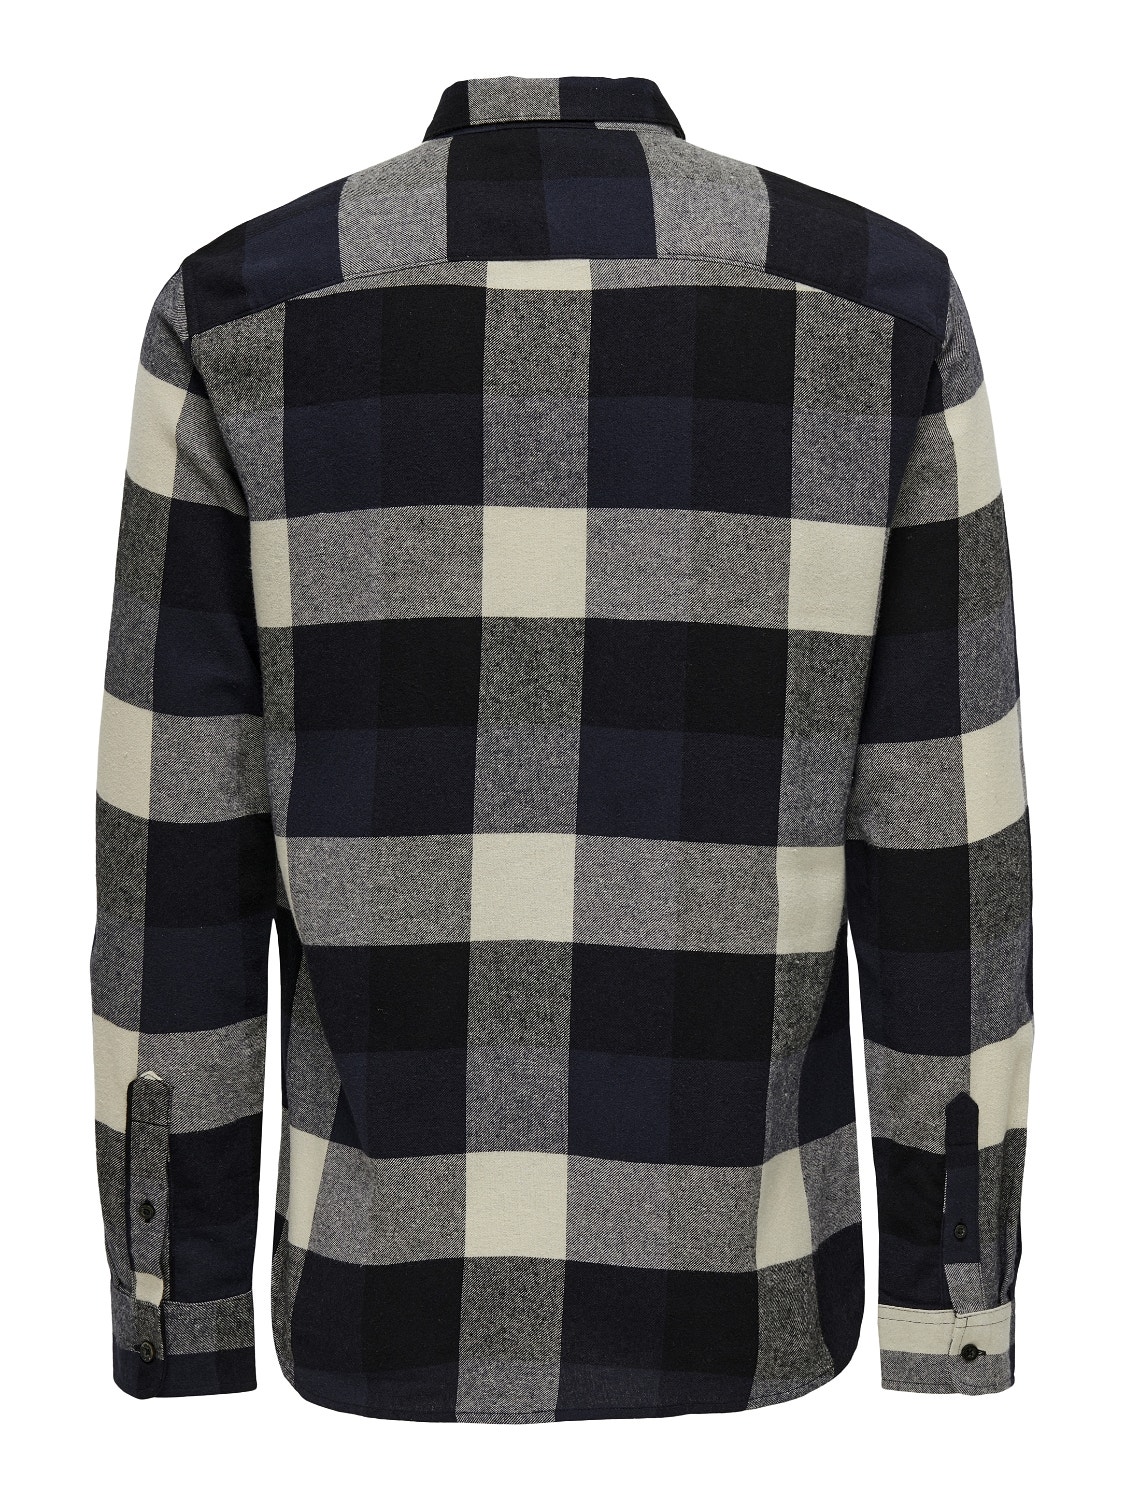 ONLY & SONS Checked shirt -Dark Navy - 22020301